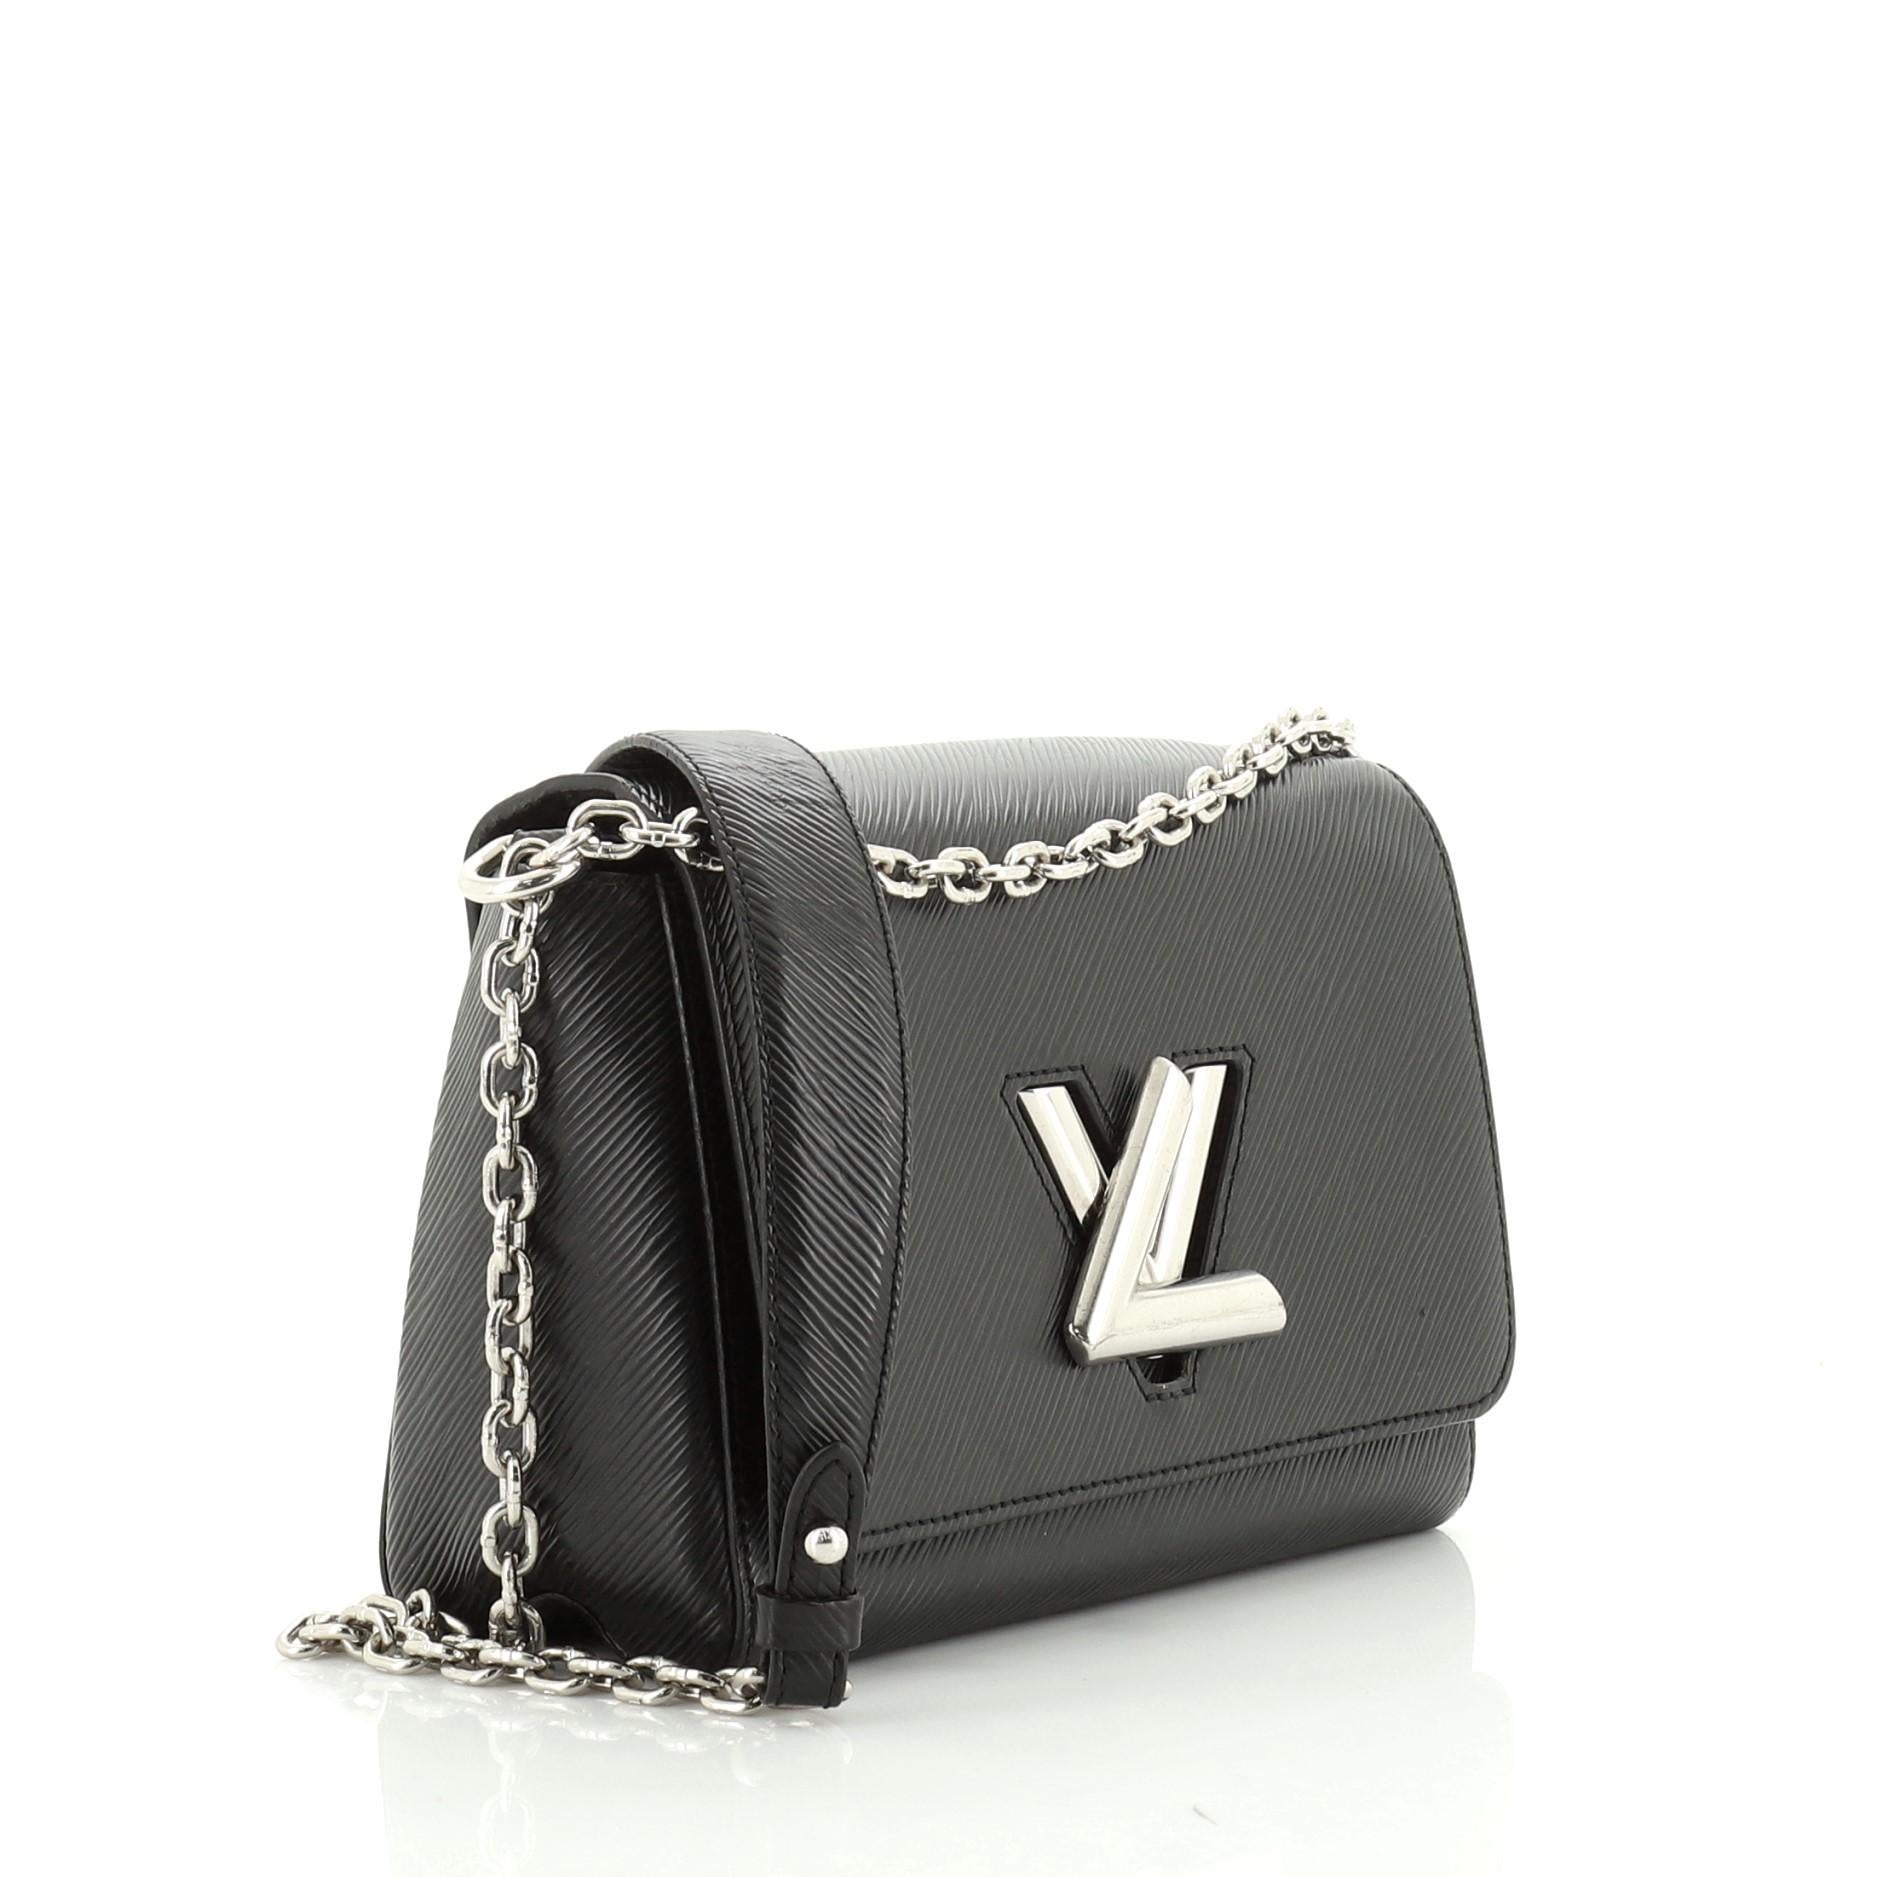 This Louis Vuitton Twist Handbag Epi Leather MM, crafted from black epi leather, features chain link strap with leather pad, frontal flap, and silver-tone hardware. Its LV twist lock closure opens to a black microfiber interior with slip pockets.